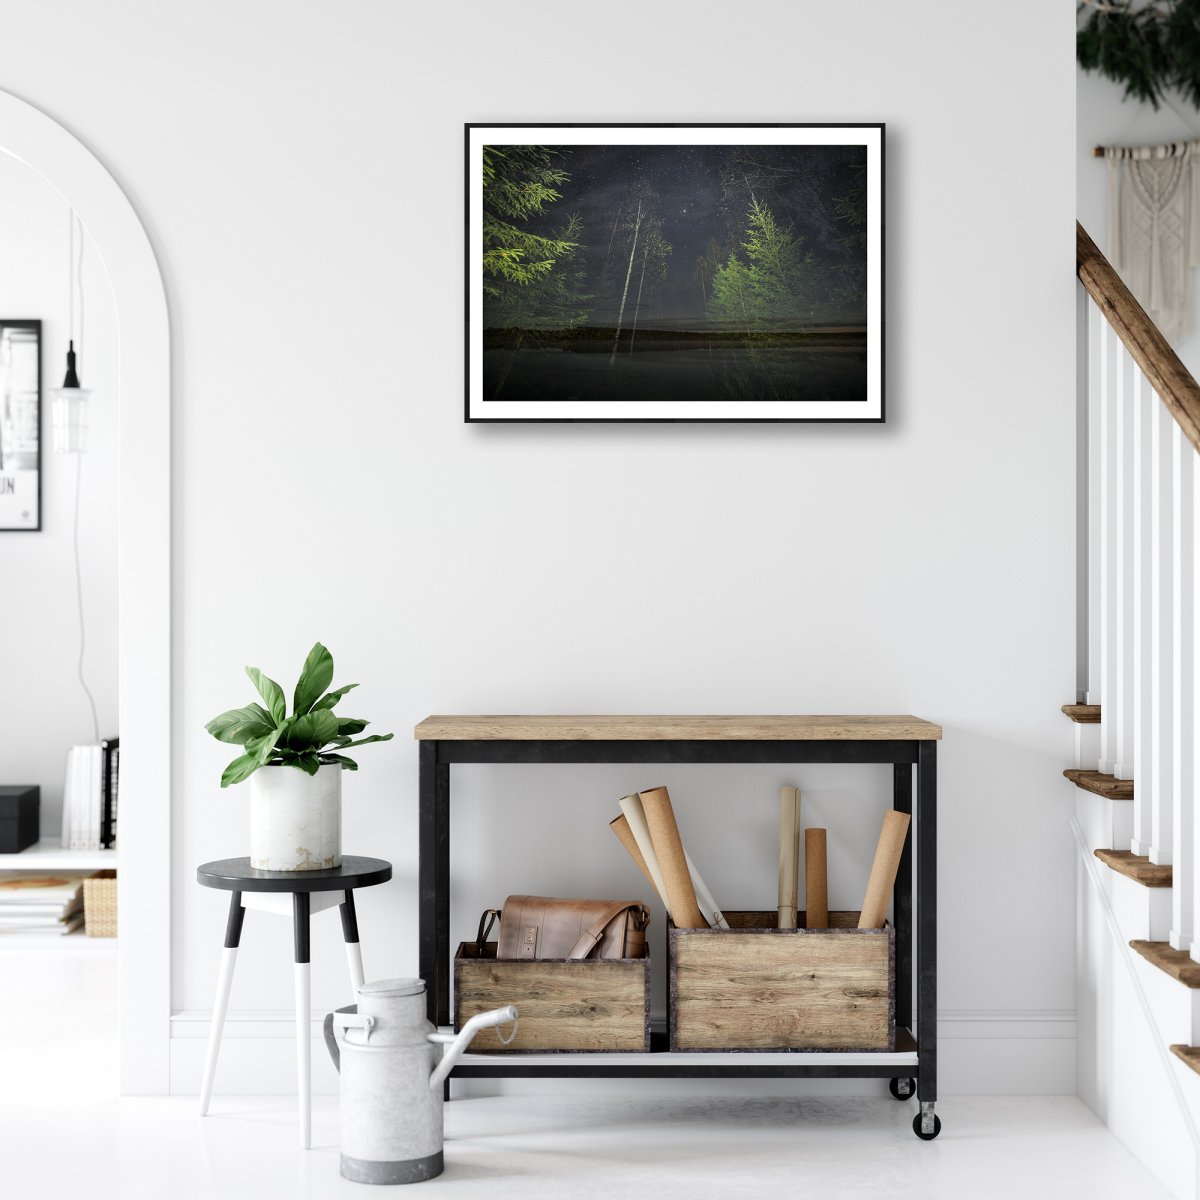 Fine art print of a nocturnal forest and lakeside double exposure, hung above a desk in a living room.